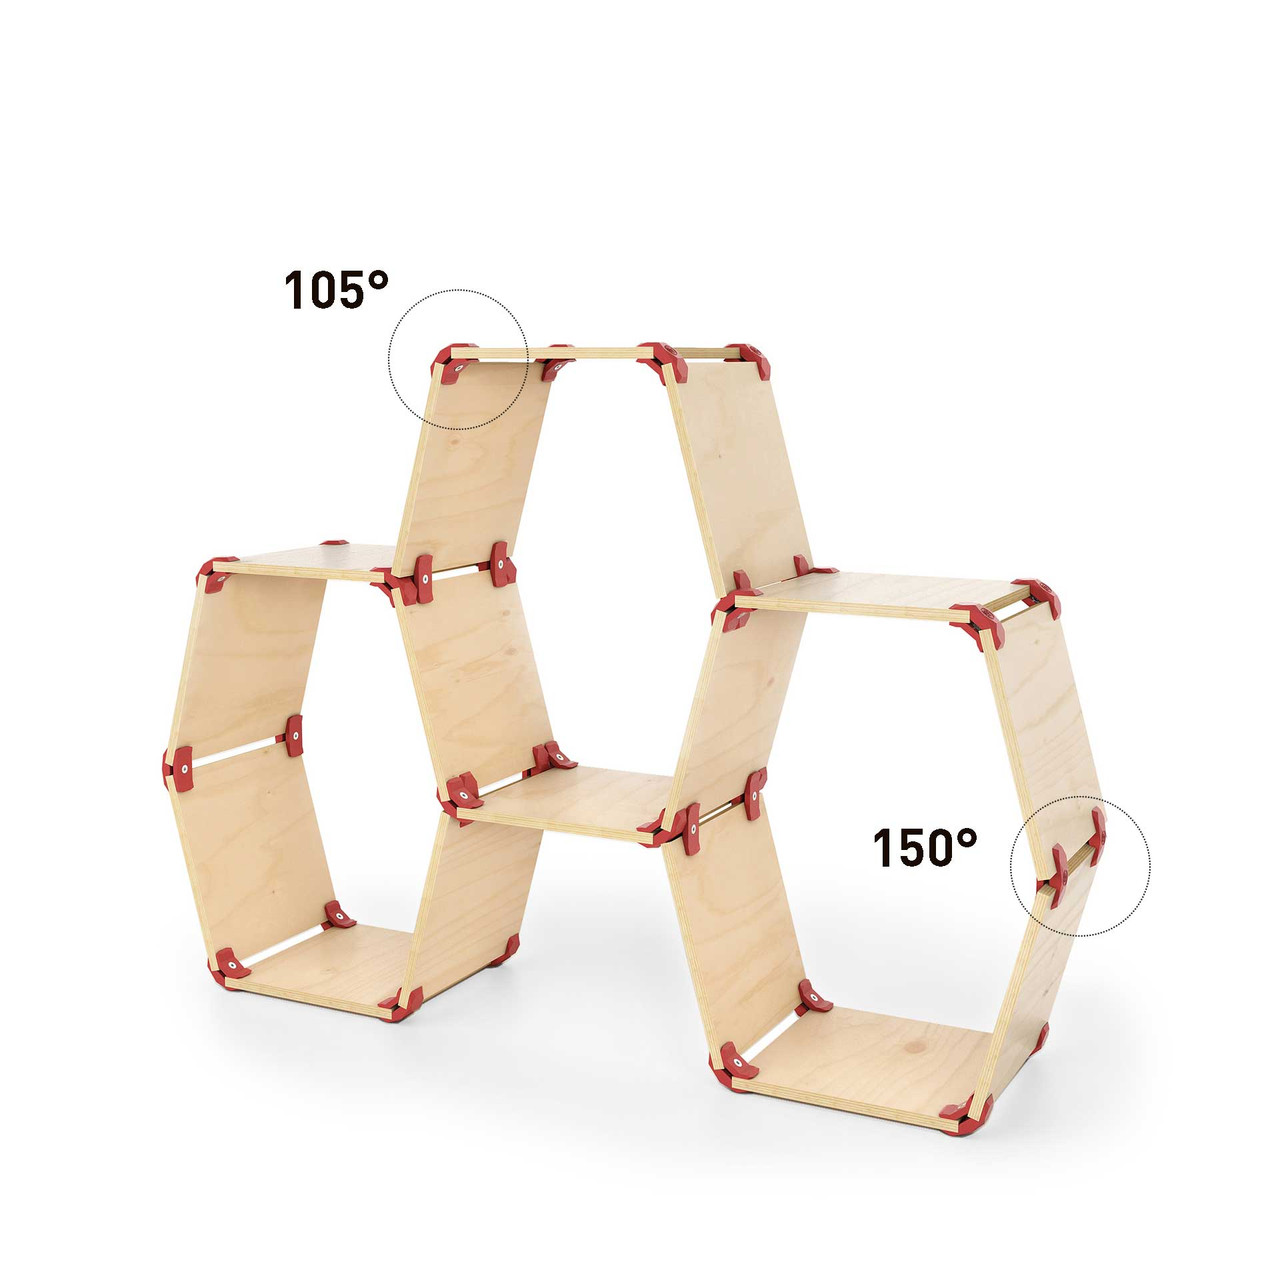 PlayWood Connector for Tool-Free Modular Pop-Up Hexagonal Storage Assembly